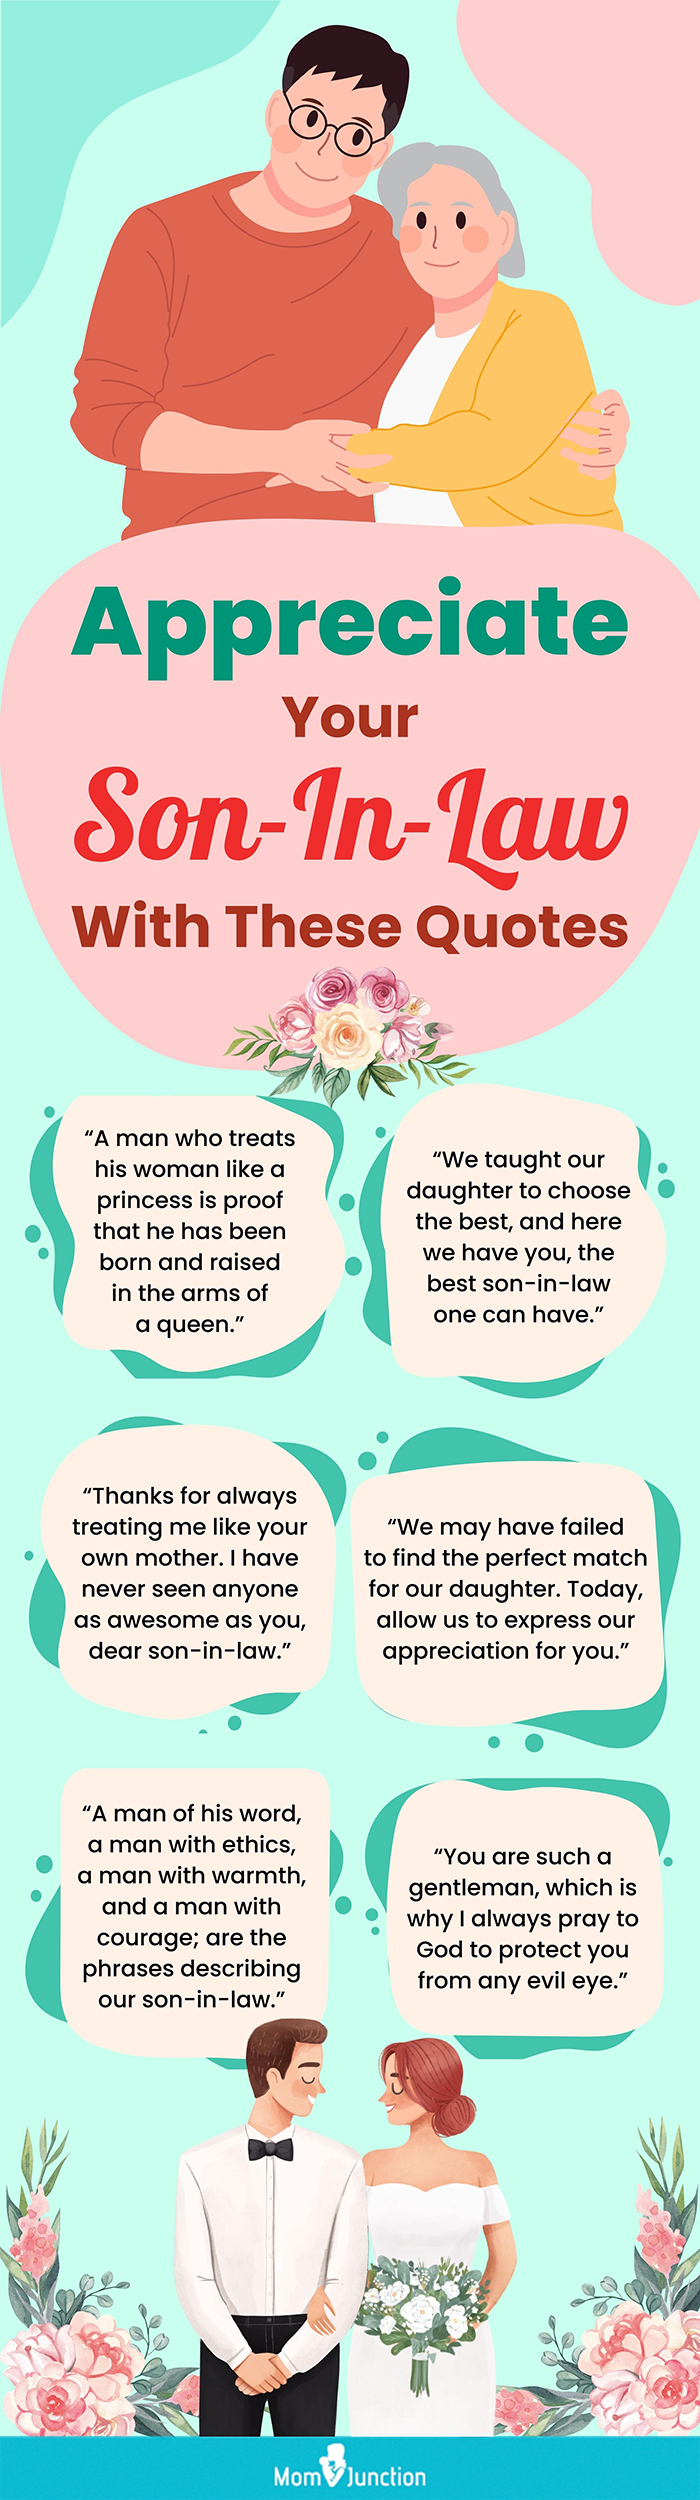 100+ Loving And Respectful Son-In-Law Quotes